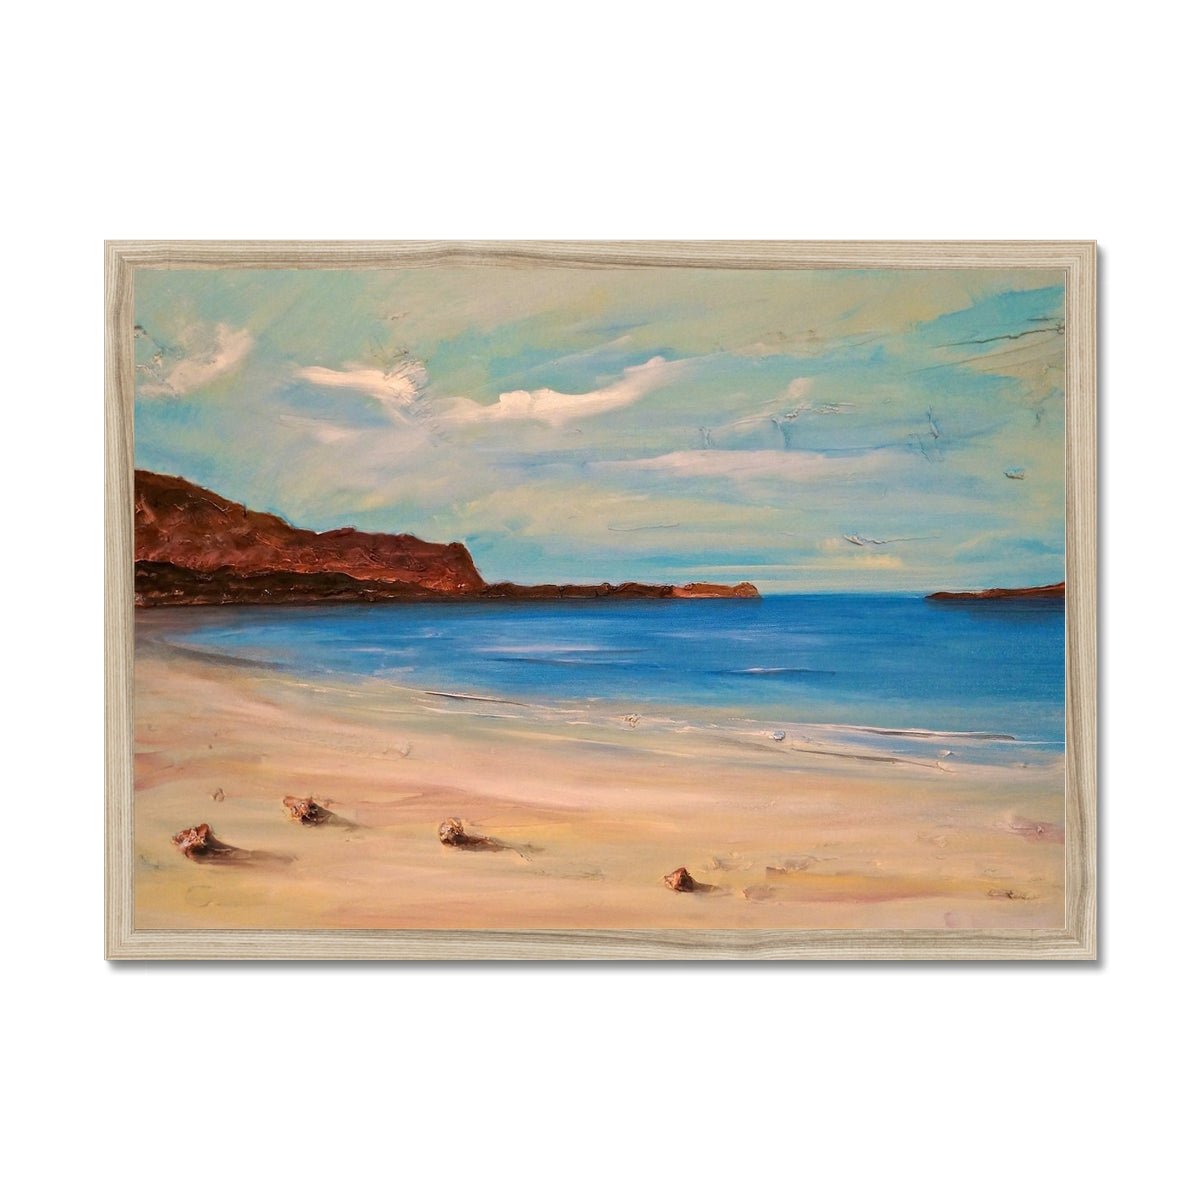 Bosta Beach Lewis Painting | Framed Prints From Scotland-Framed Prints-Hebridean Islands Art Gallery-A2 Landscape-Natural Frame-Paintings, Prints, Homeware, Art Gifts From Scotland By Scottish Artist Kevin Hunter